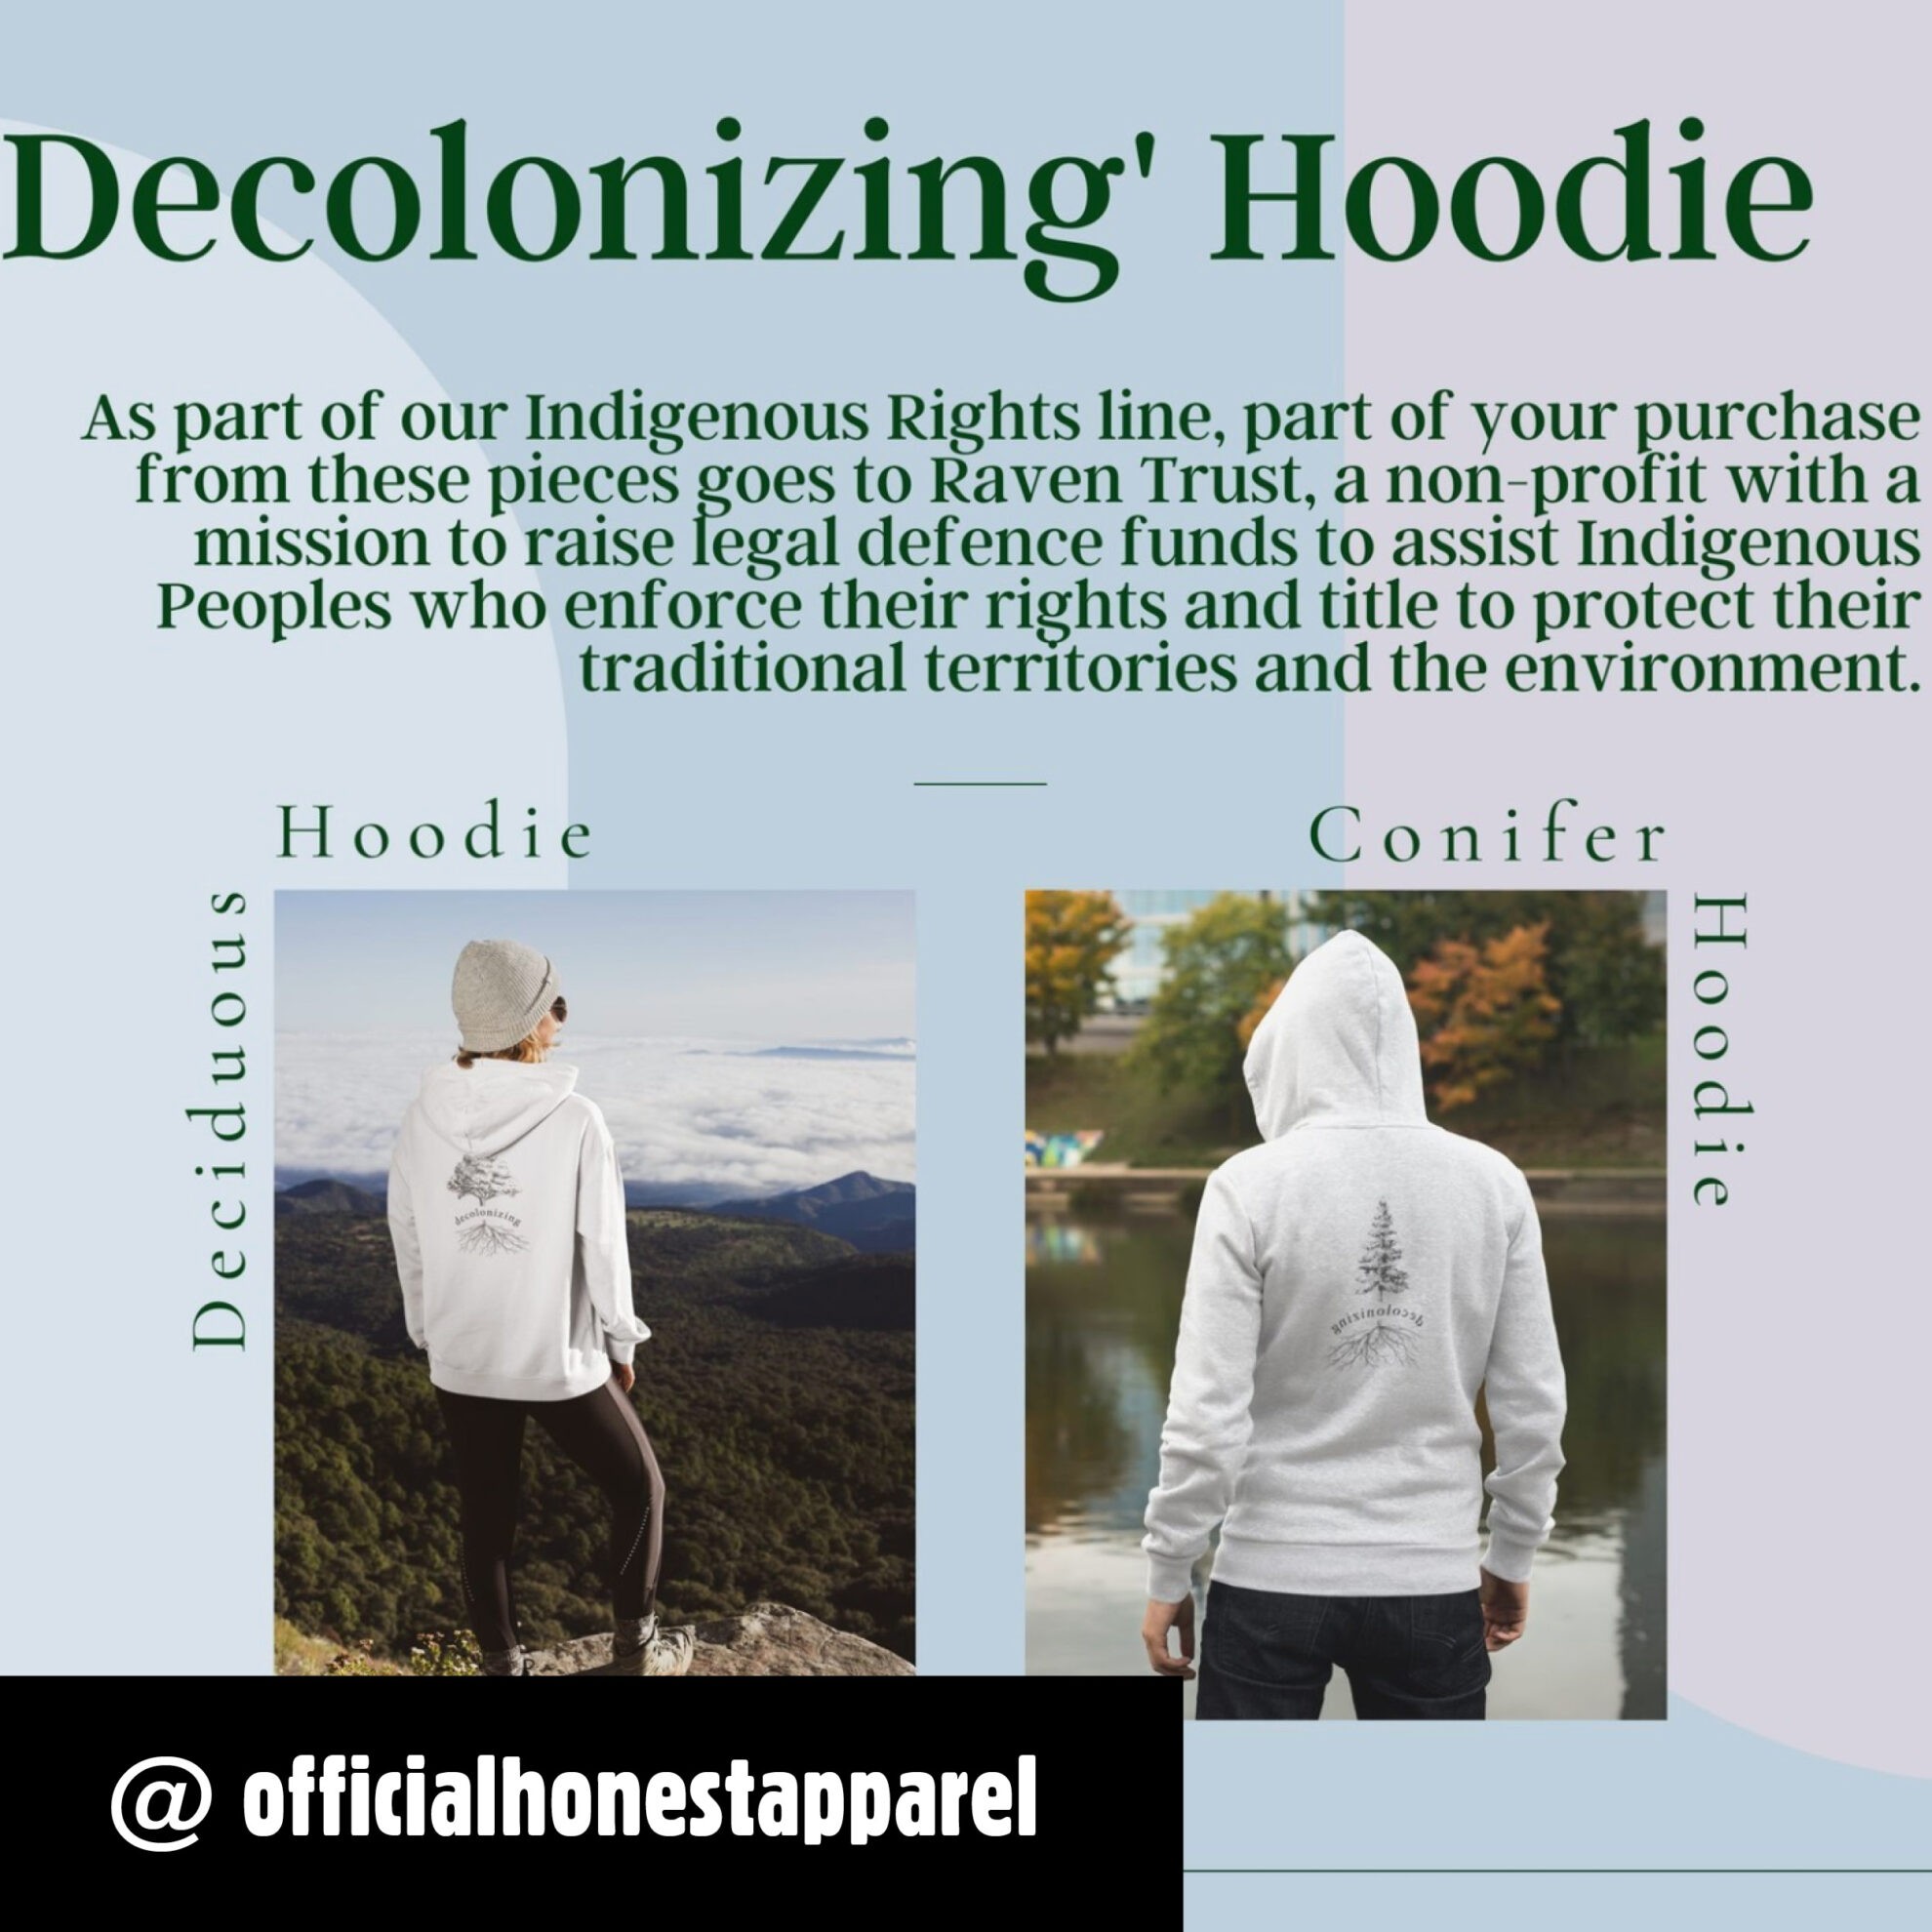 Social Graphic from Honest Apparel describing their "Decolonizing Hoodie" that raised funds for RAVEN